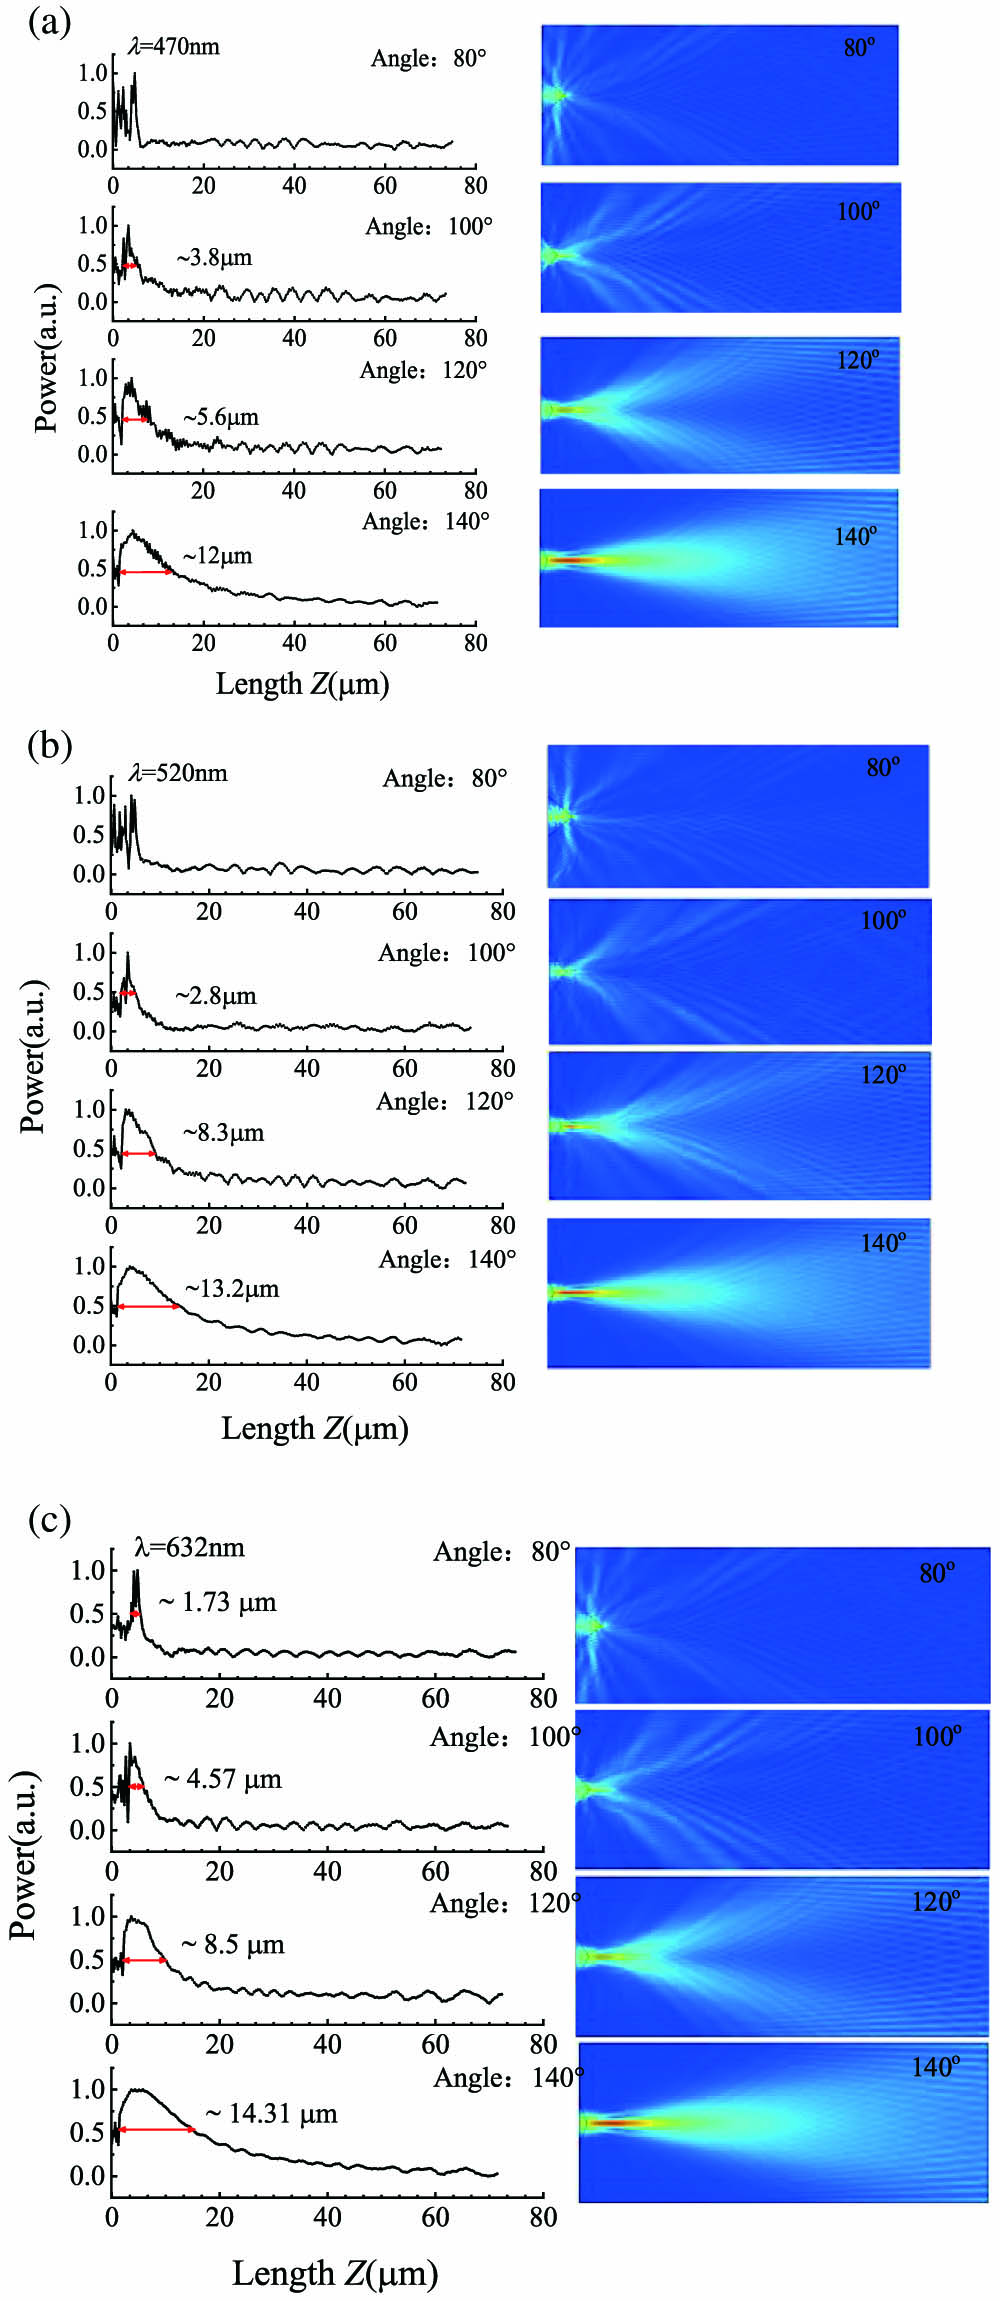 Power distribution of Bessel-like beams from fiber microaxicons with different cone angles of 80°, 100°, 120°, and 140° at different visible wavelengths of (a) 470 nm, (b) 520 nm, and (c) 632 nm in the air.